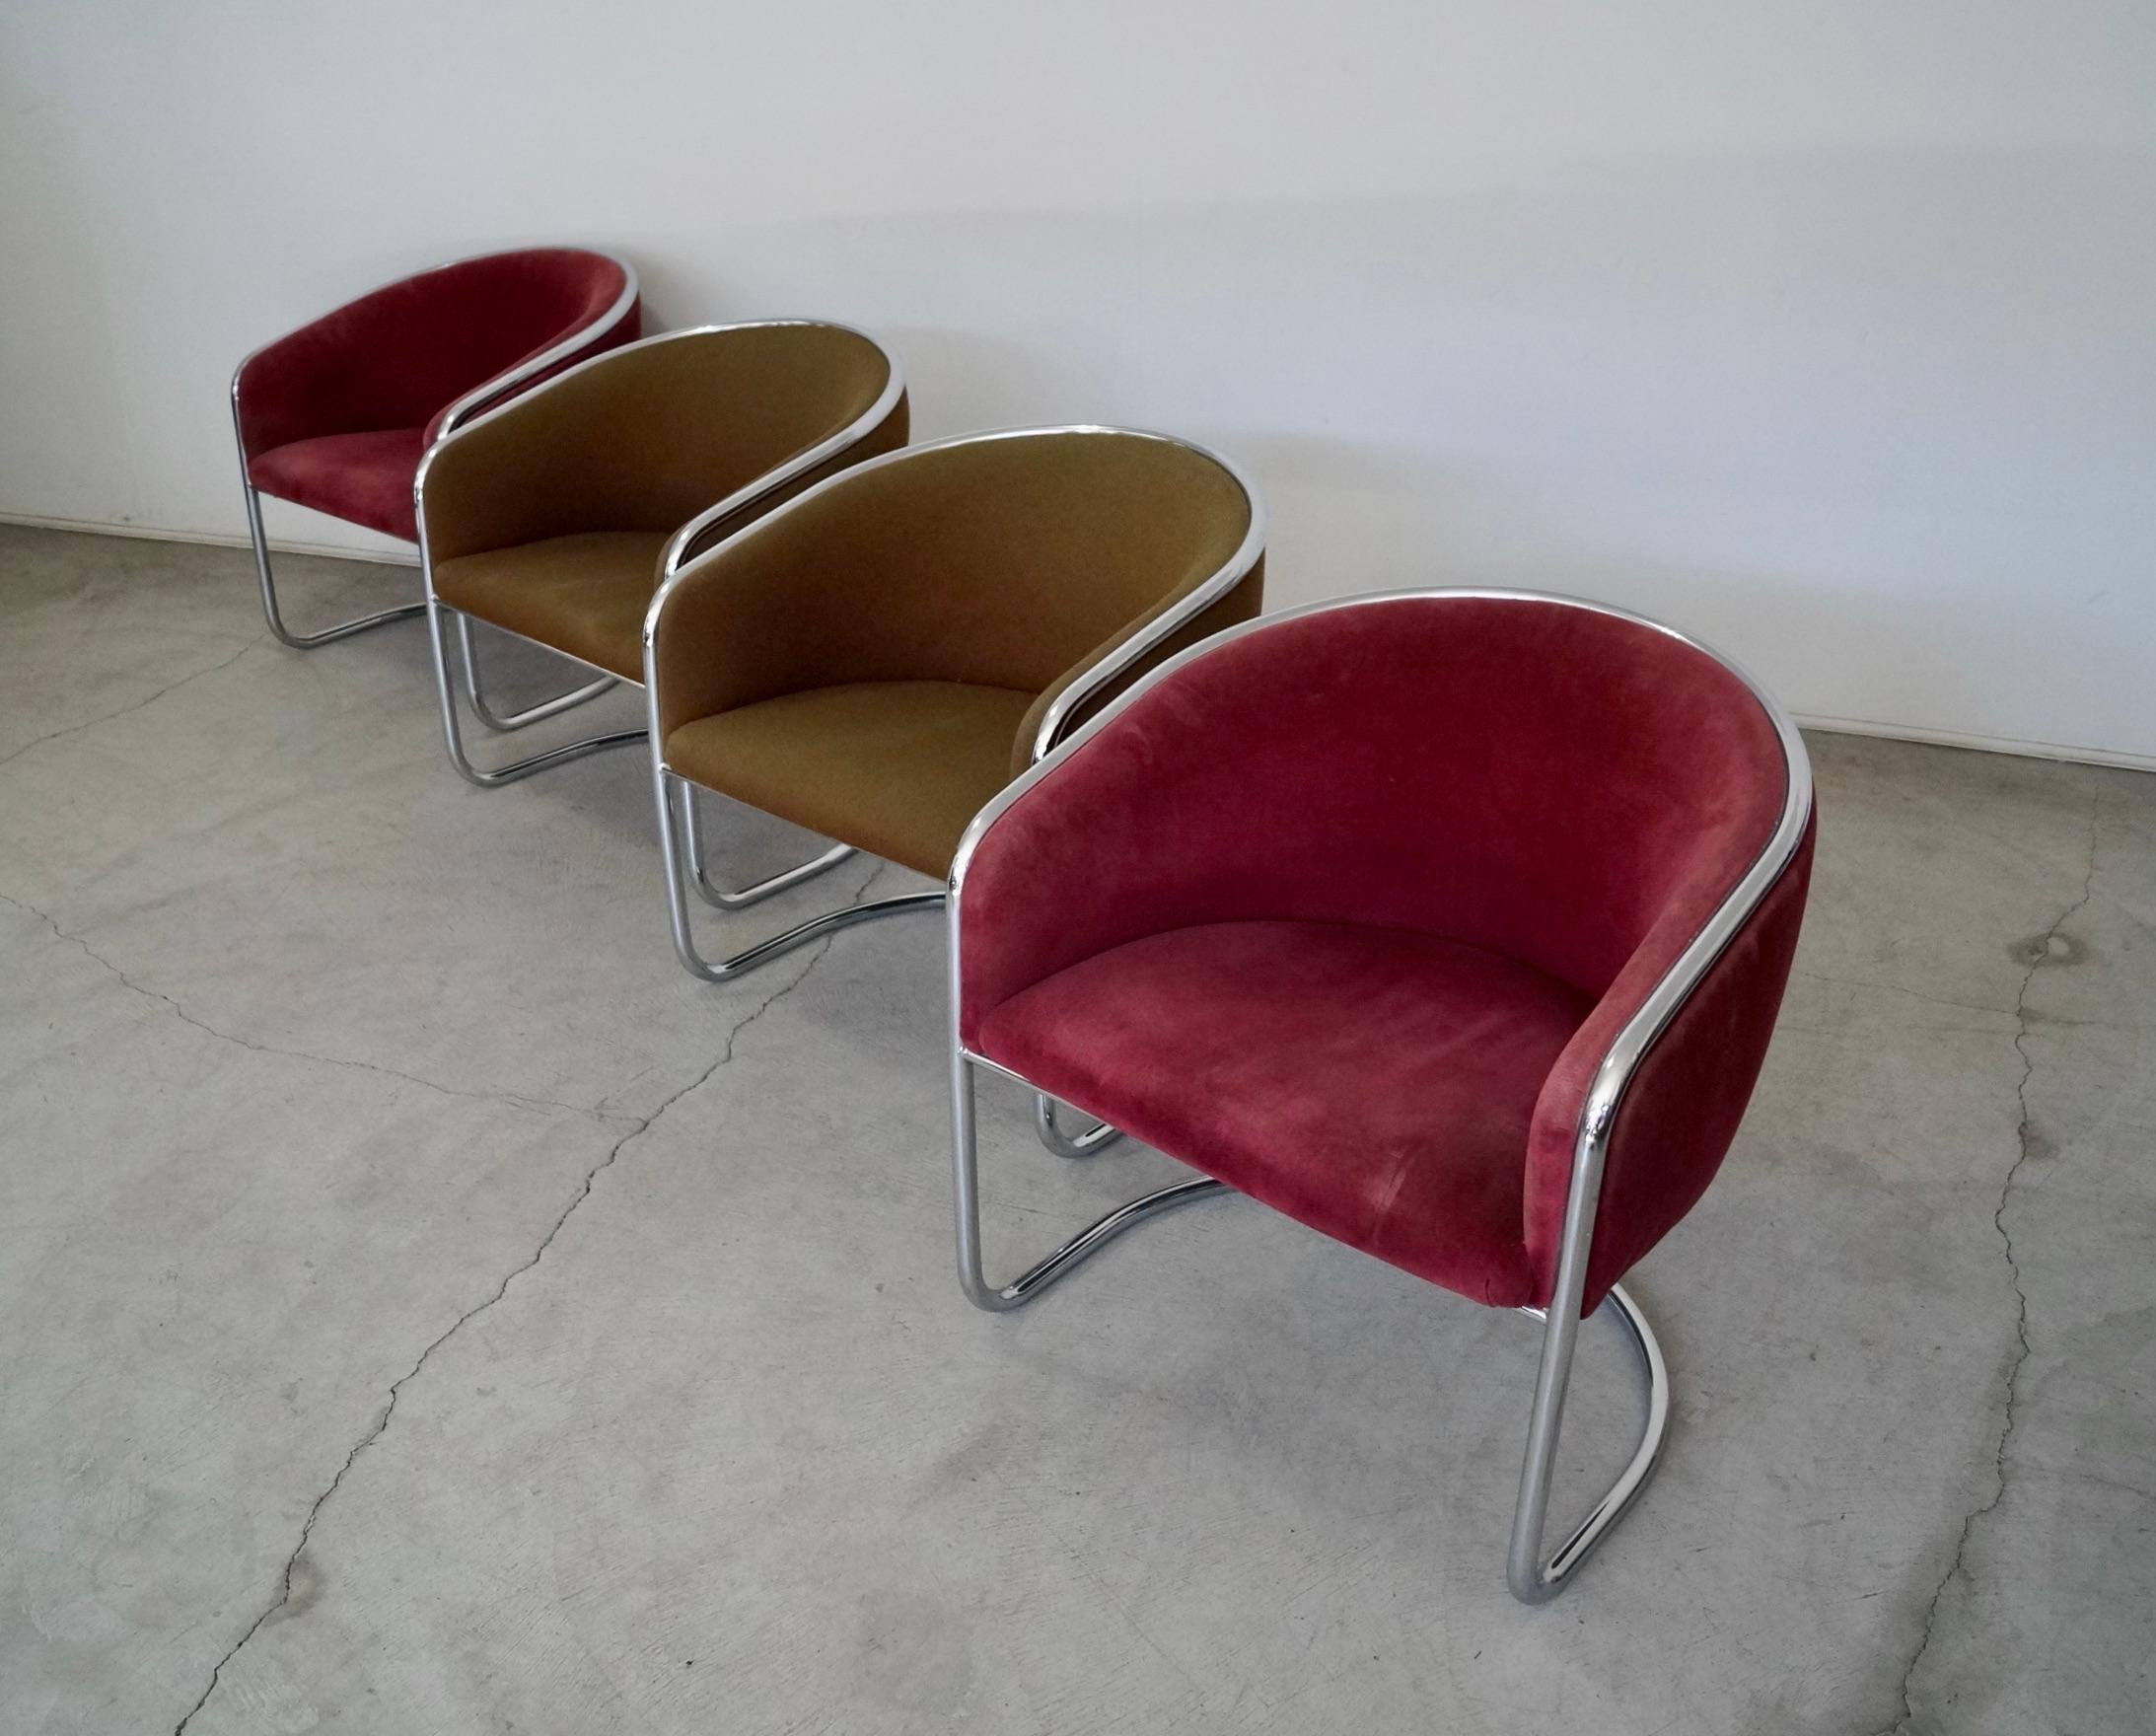 American 1970's Mid-Century Modern Thonet Chrome Armchairs - Set of Four For Sale